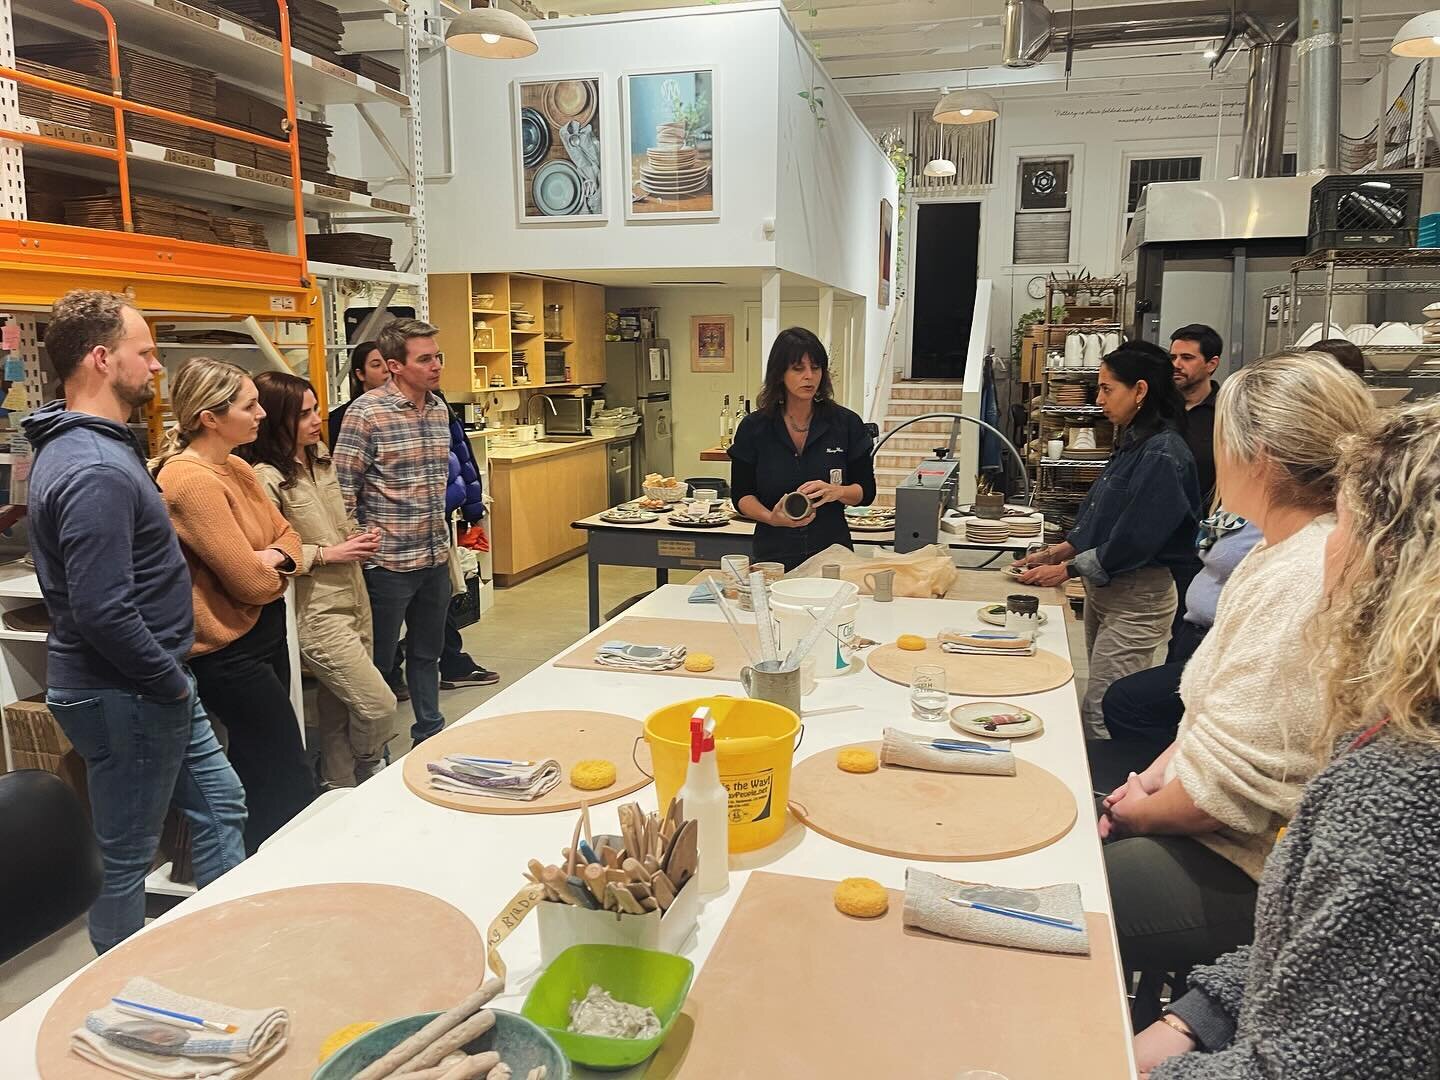 If you don&rsquo;t know about @mmclay_ceramics, check them out! They make the most incredible ceramic tableware and other goodies.  Last night we attended a hands-on clay building workshop with a group of school parents and friends, and walked away w